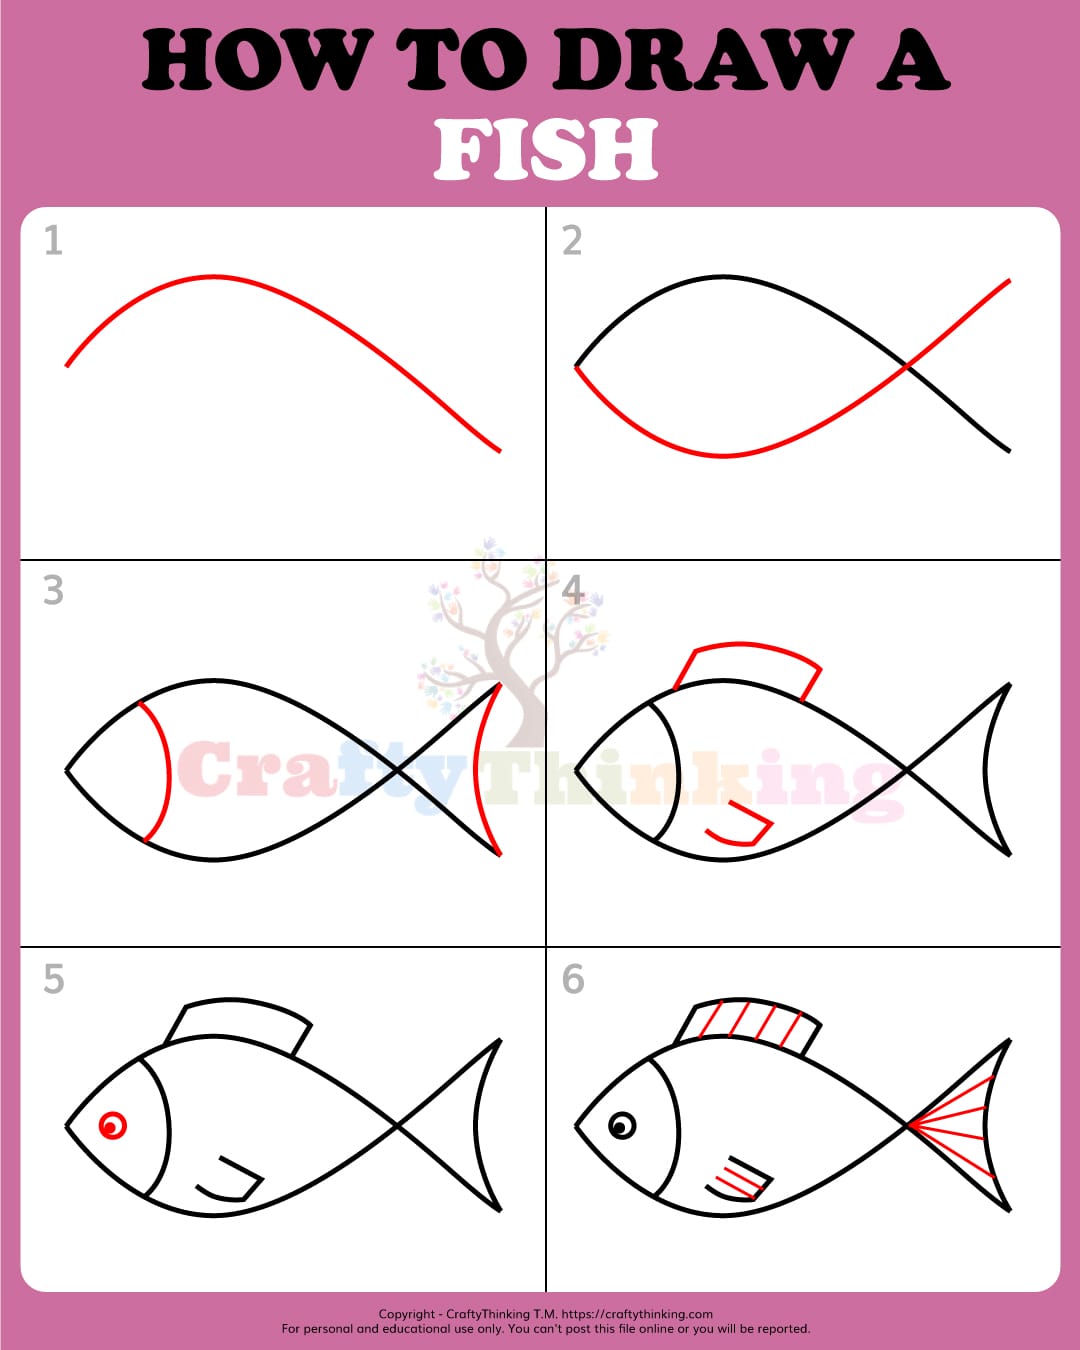 How to Draw a Fish | Easy Summer Art Idea - Arty Crafty Kids